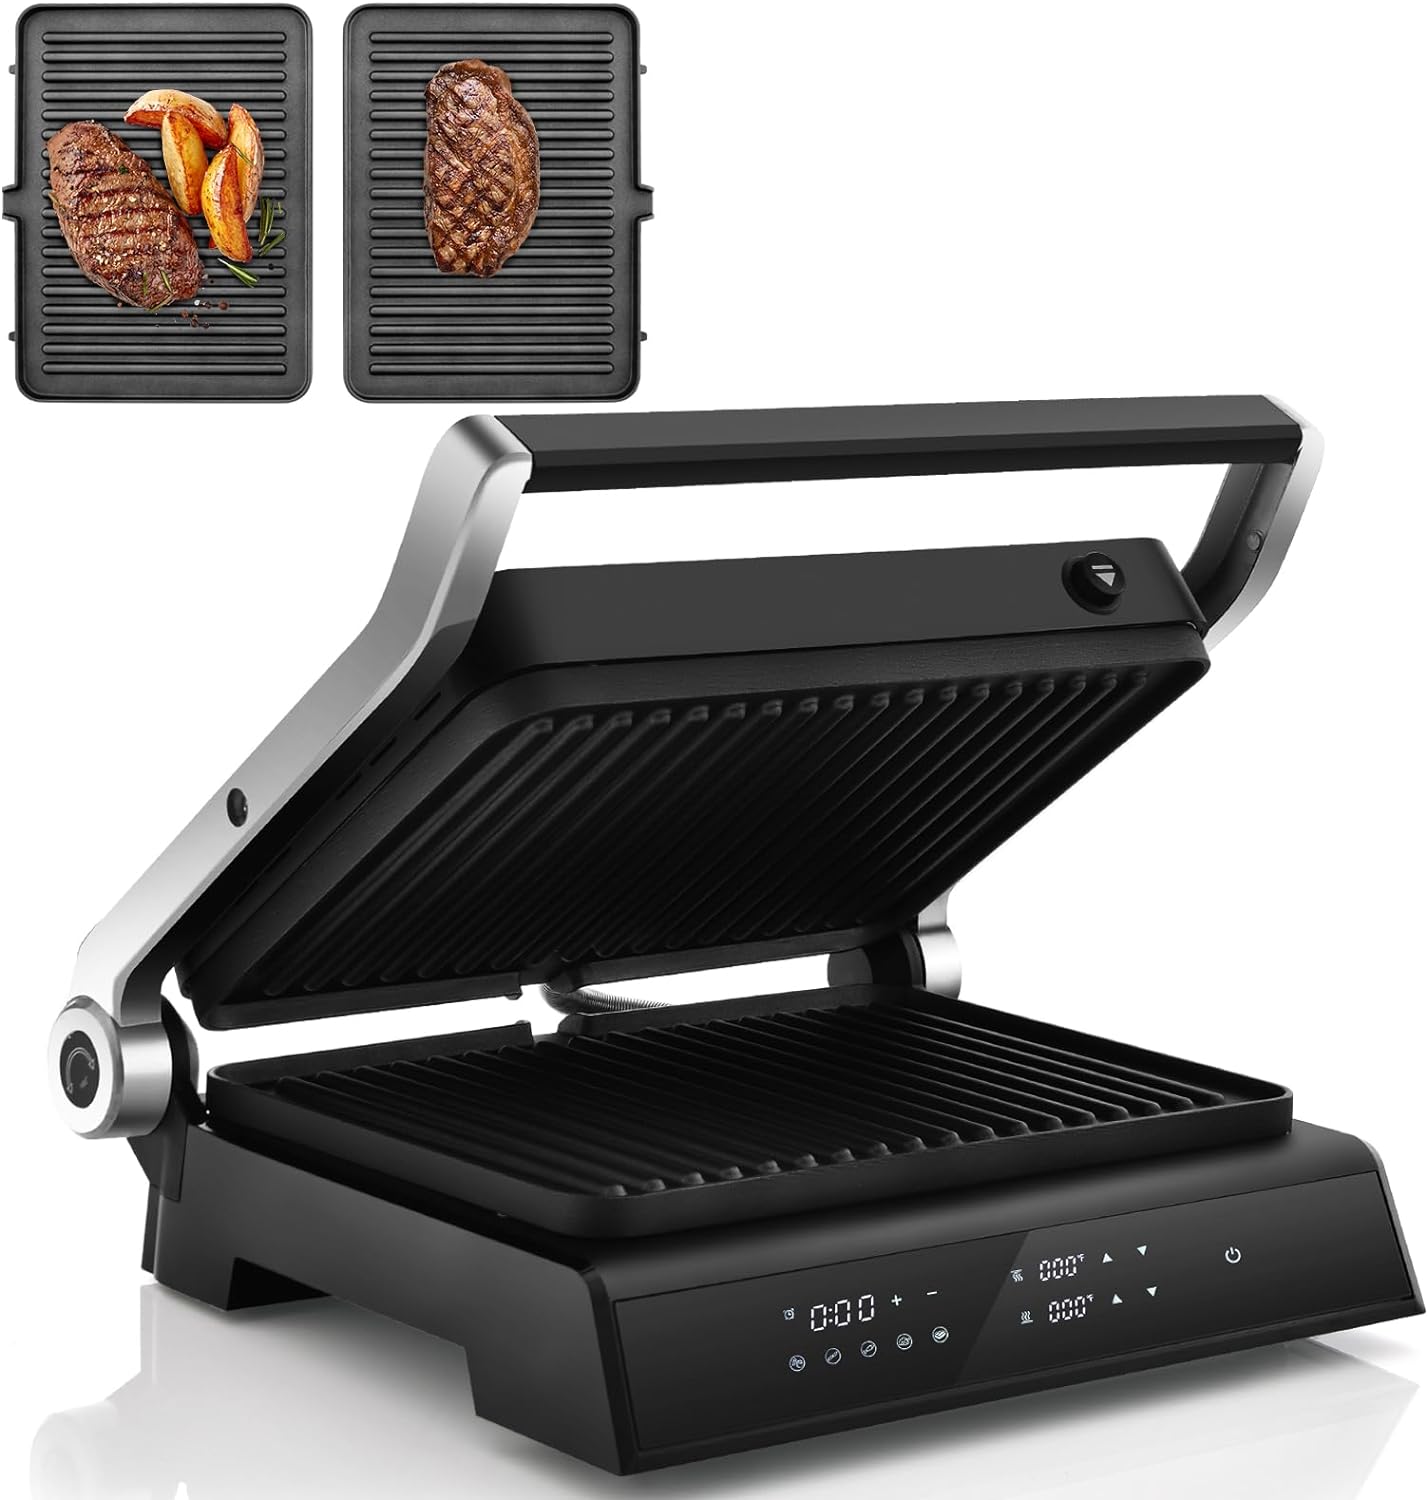 COSTWAY Contact Grill 1200 W Sandwich Maker, Electric Grill with LED Display & 4-Hour Timer & 2 Removable Grill Plates, 90℃-230℃ Temperature Setting